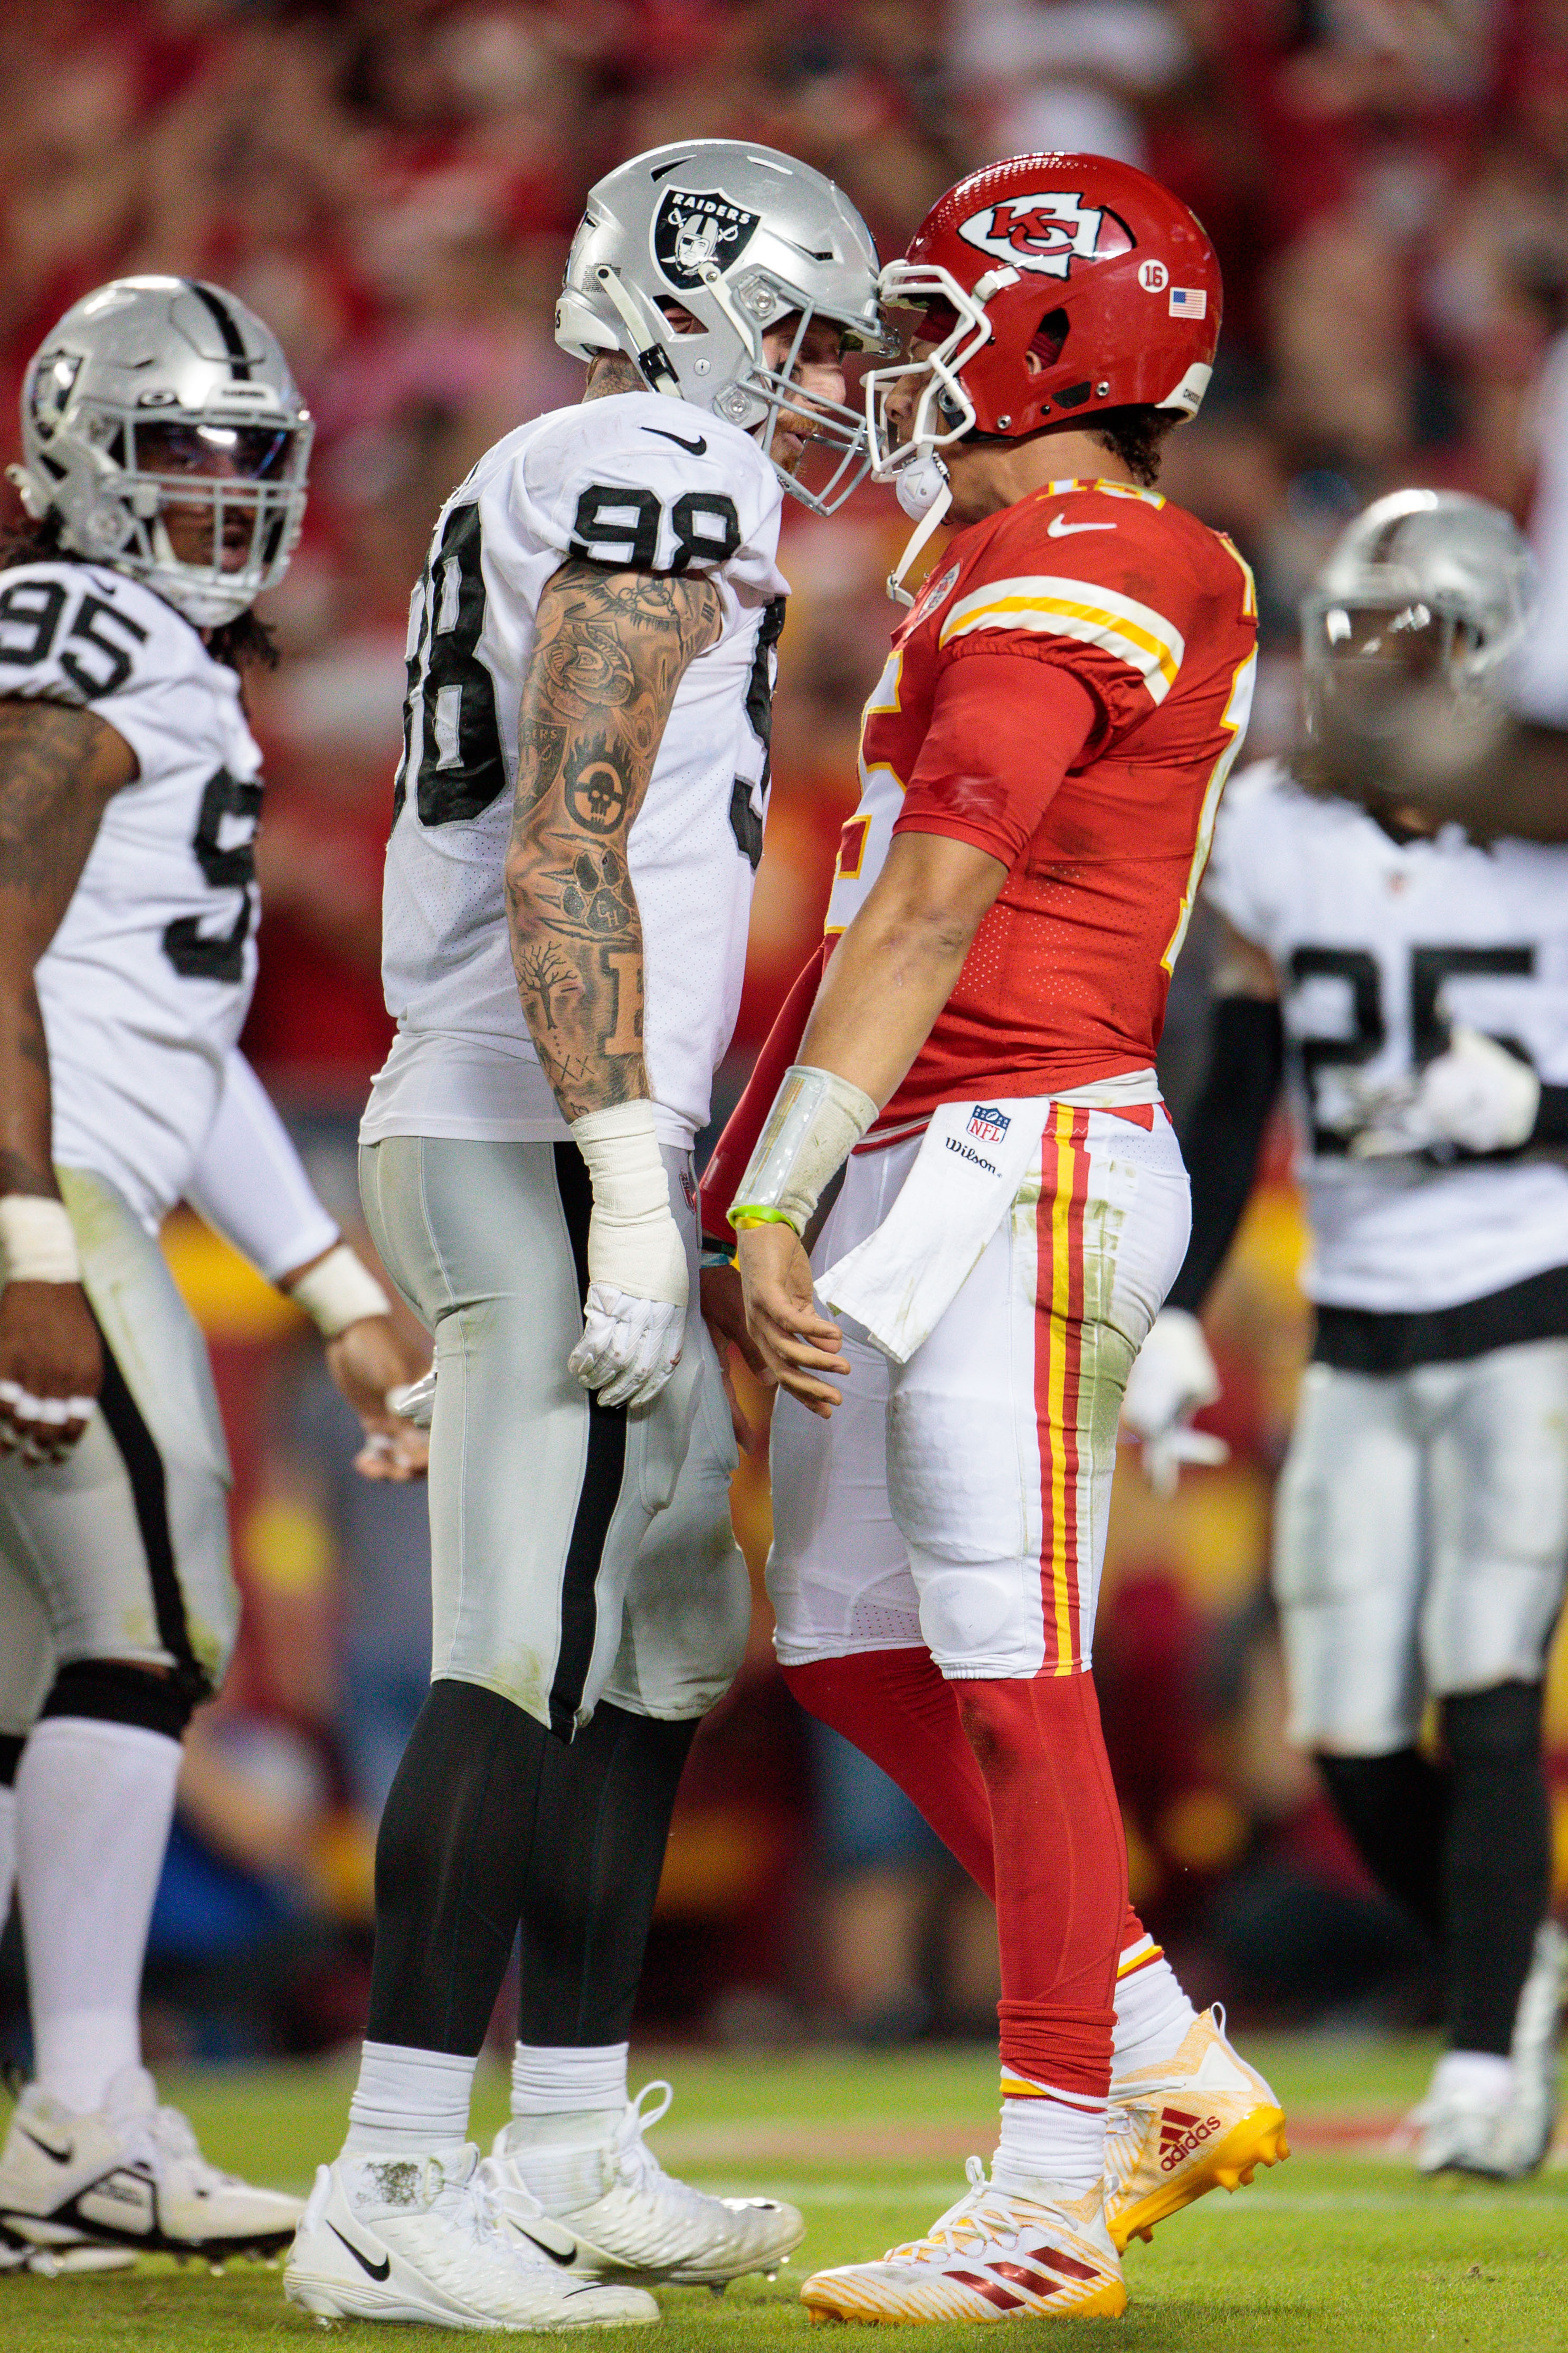 The rivalry between Maxx Crosby and Patrick Mahomes will only increase with the Raiders' Mahomes Rules